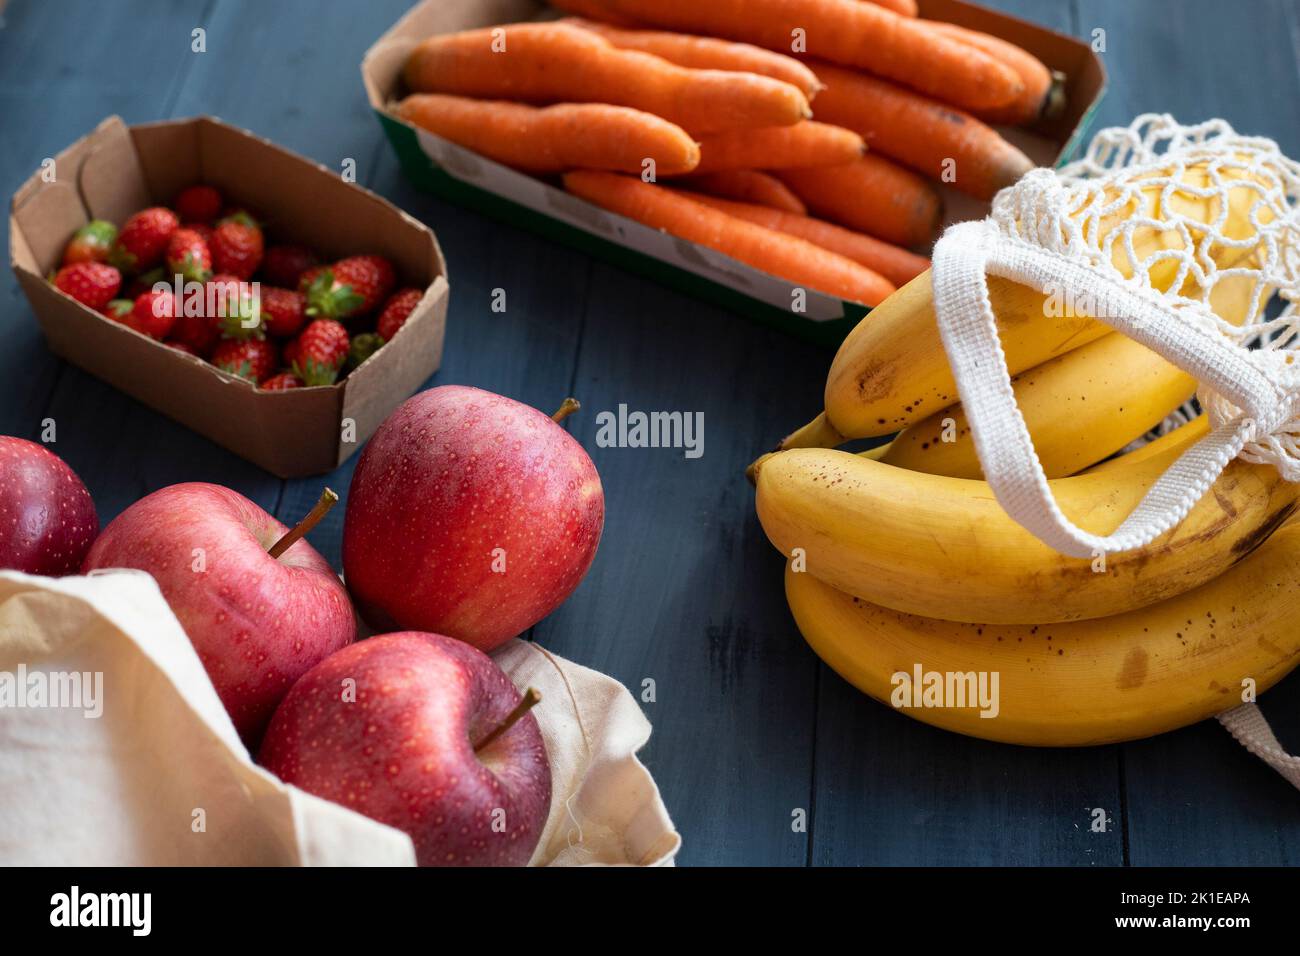 Assorted vegetables and fruits in paper and fabric reusable packages placed on blue wooden table. Eco-friendly packaging concept. Top view. Stock Photo